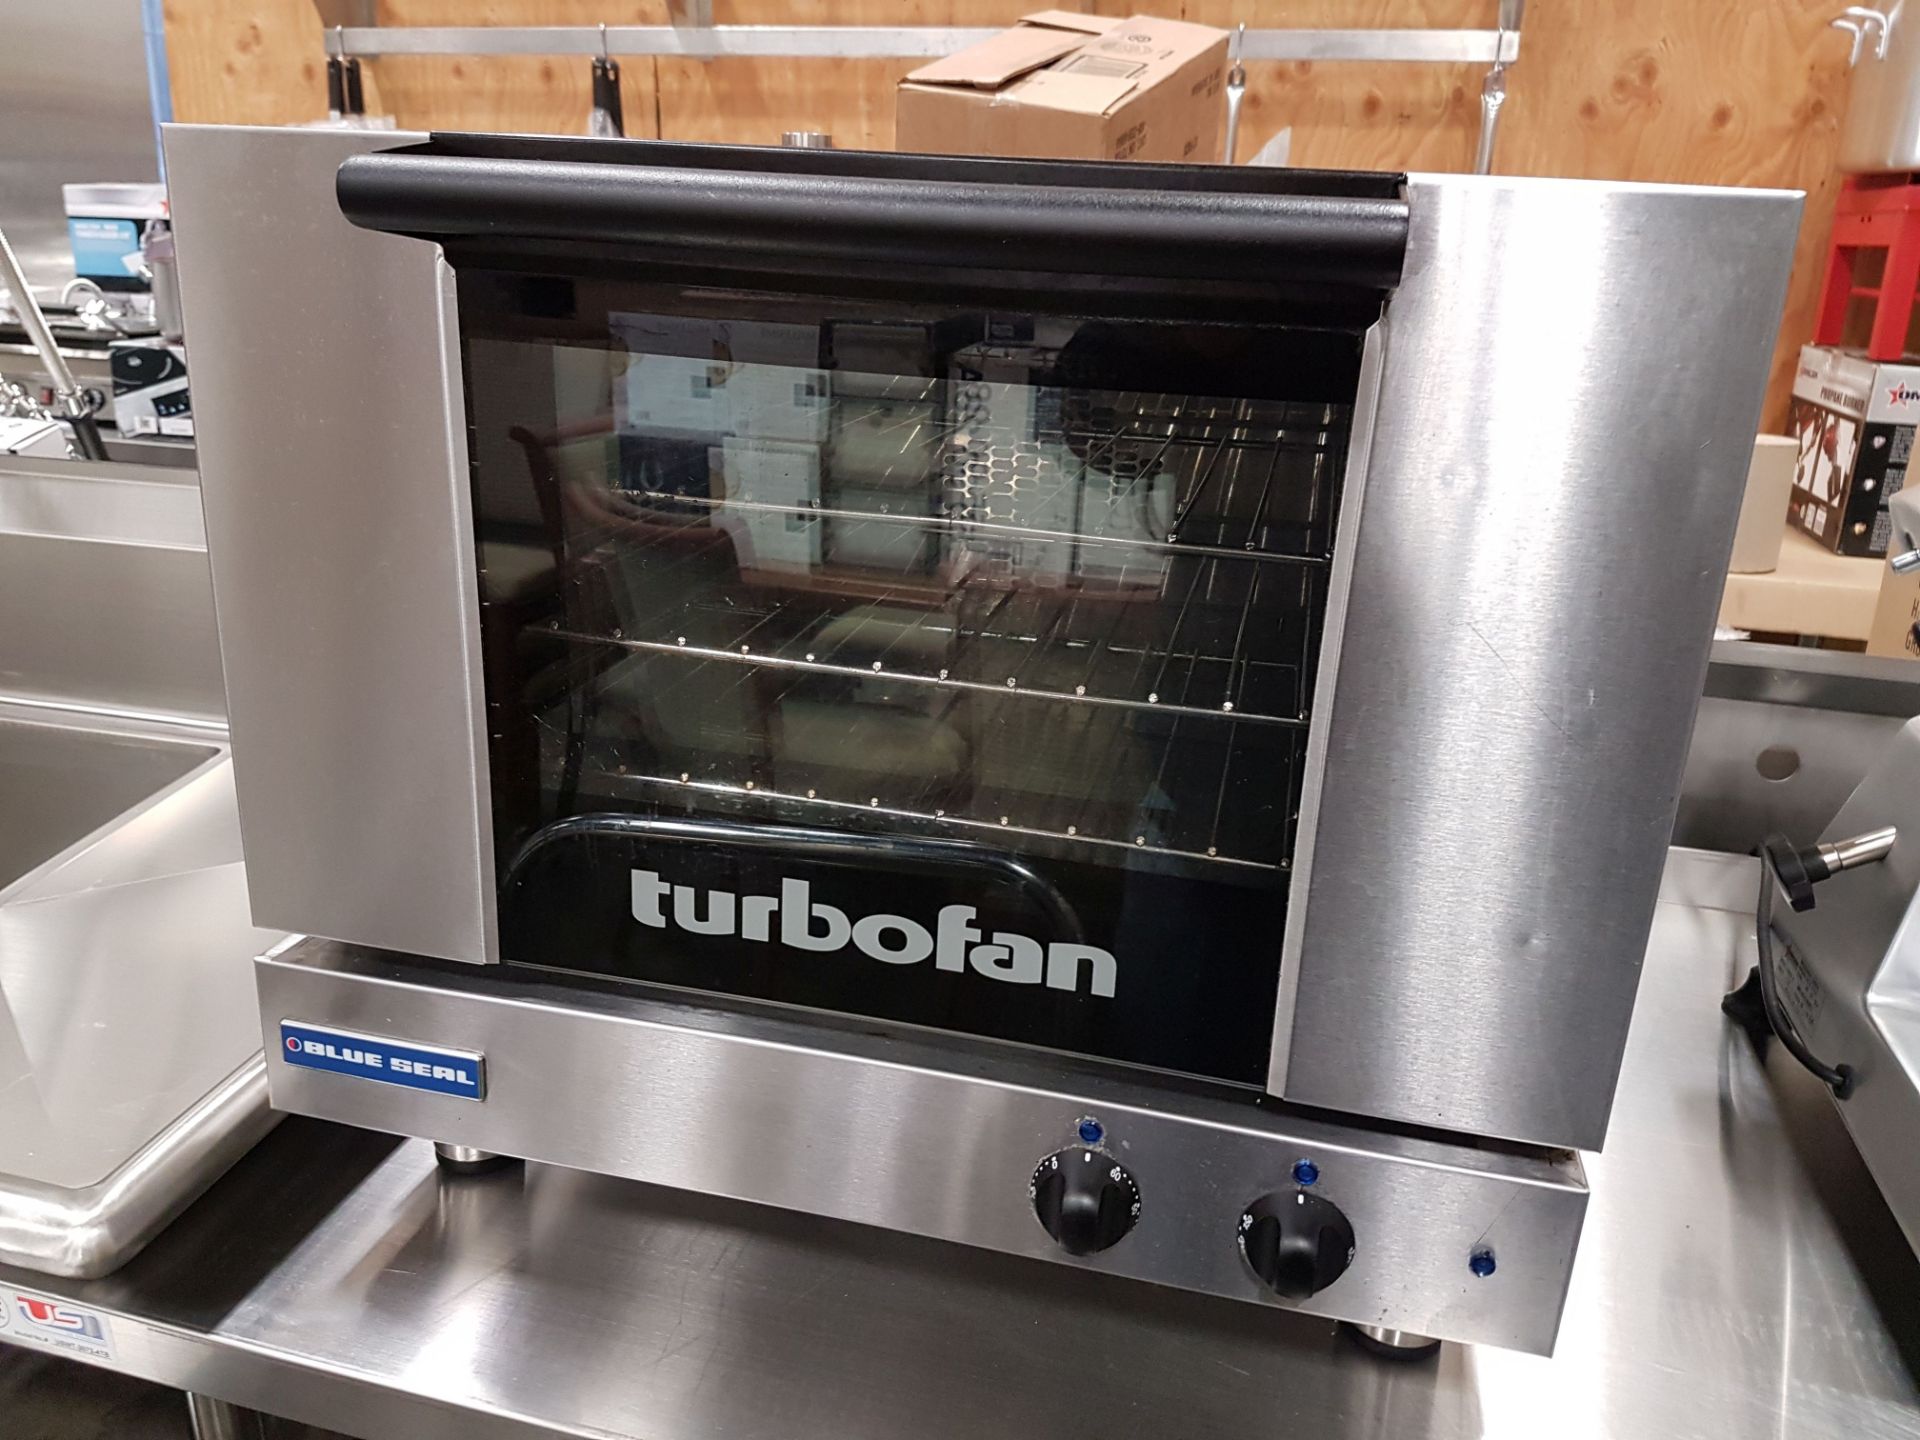 Moffat Turbofan Half-Size Electric Convection Oven